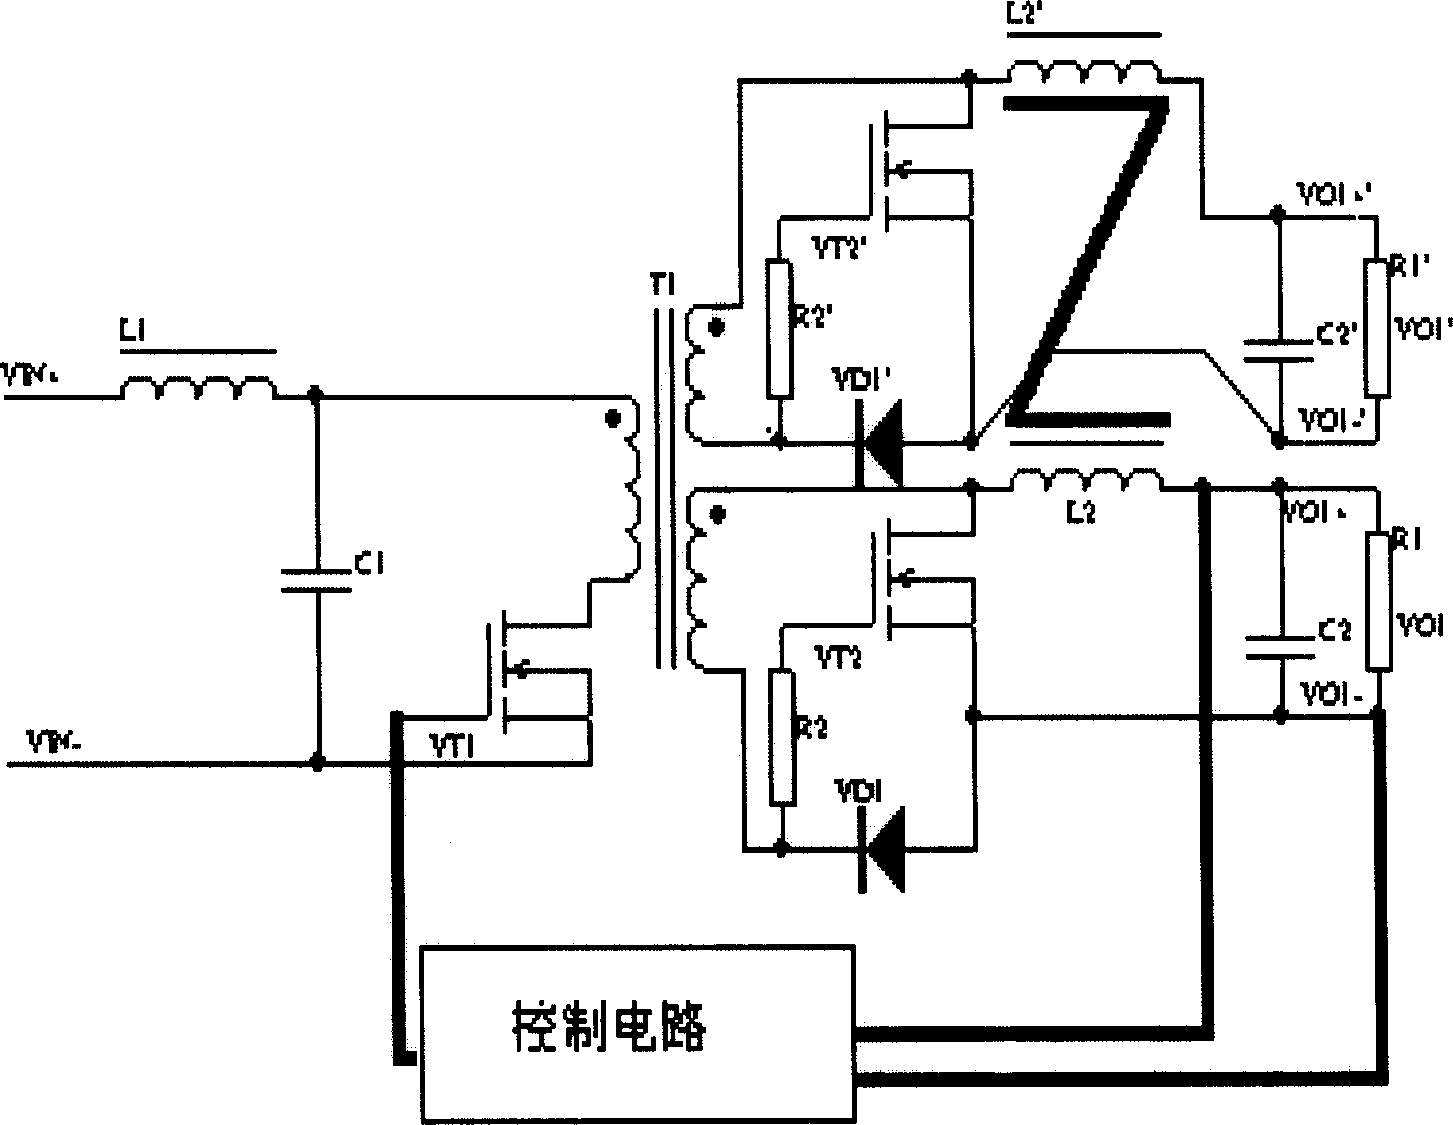 Circuit for raising unbalance of multi-output power source loads